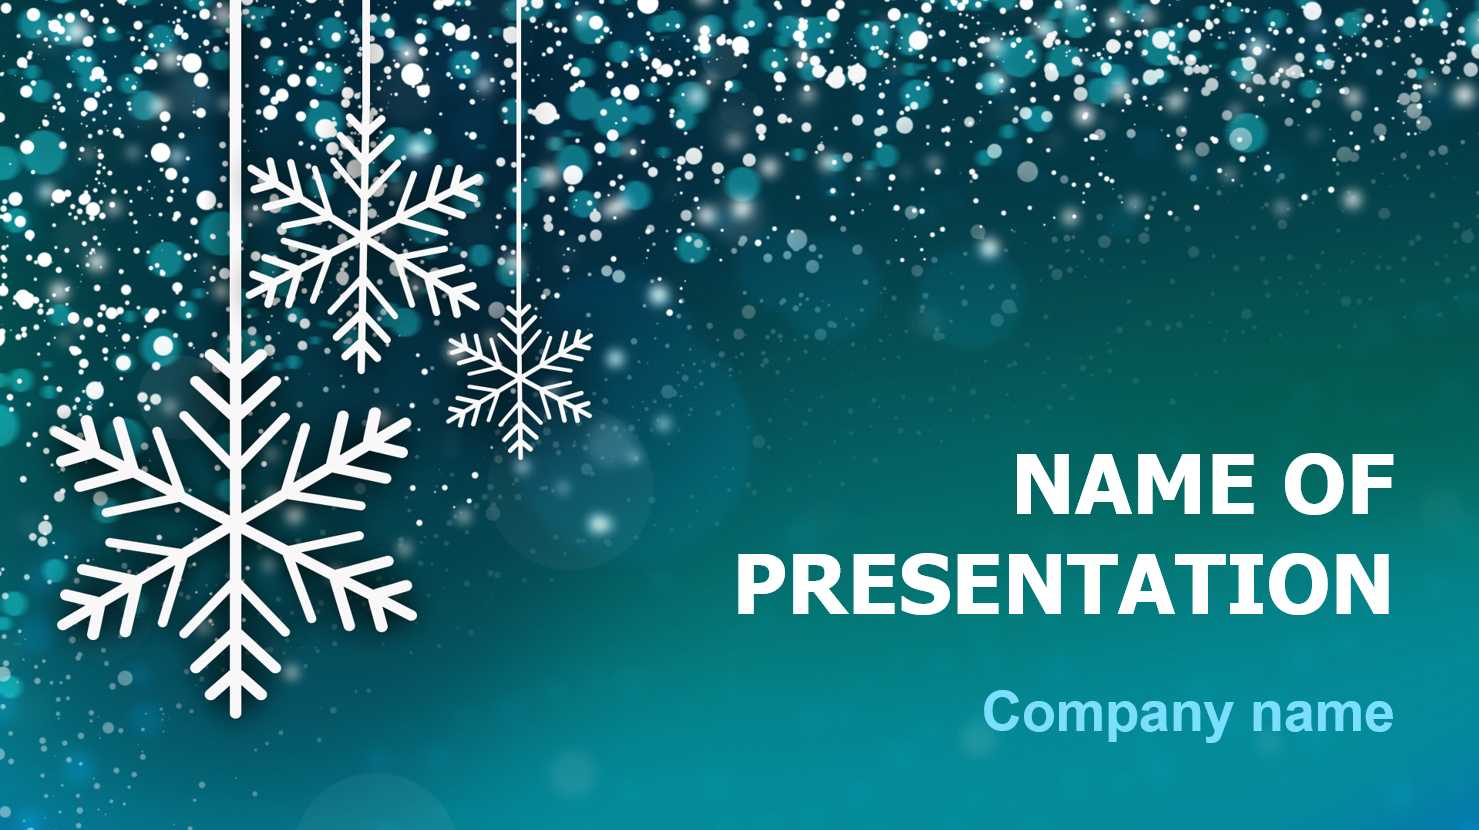 Download Free Snowing Snow Powerpoint Theme For Presentation With Regard To Snow Powerpoint Template